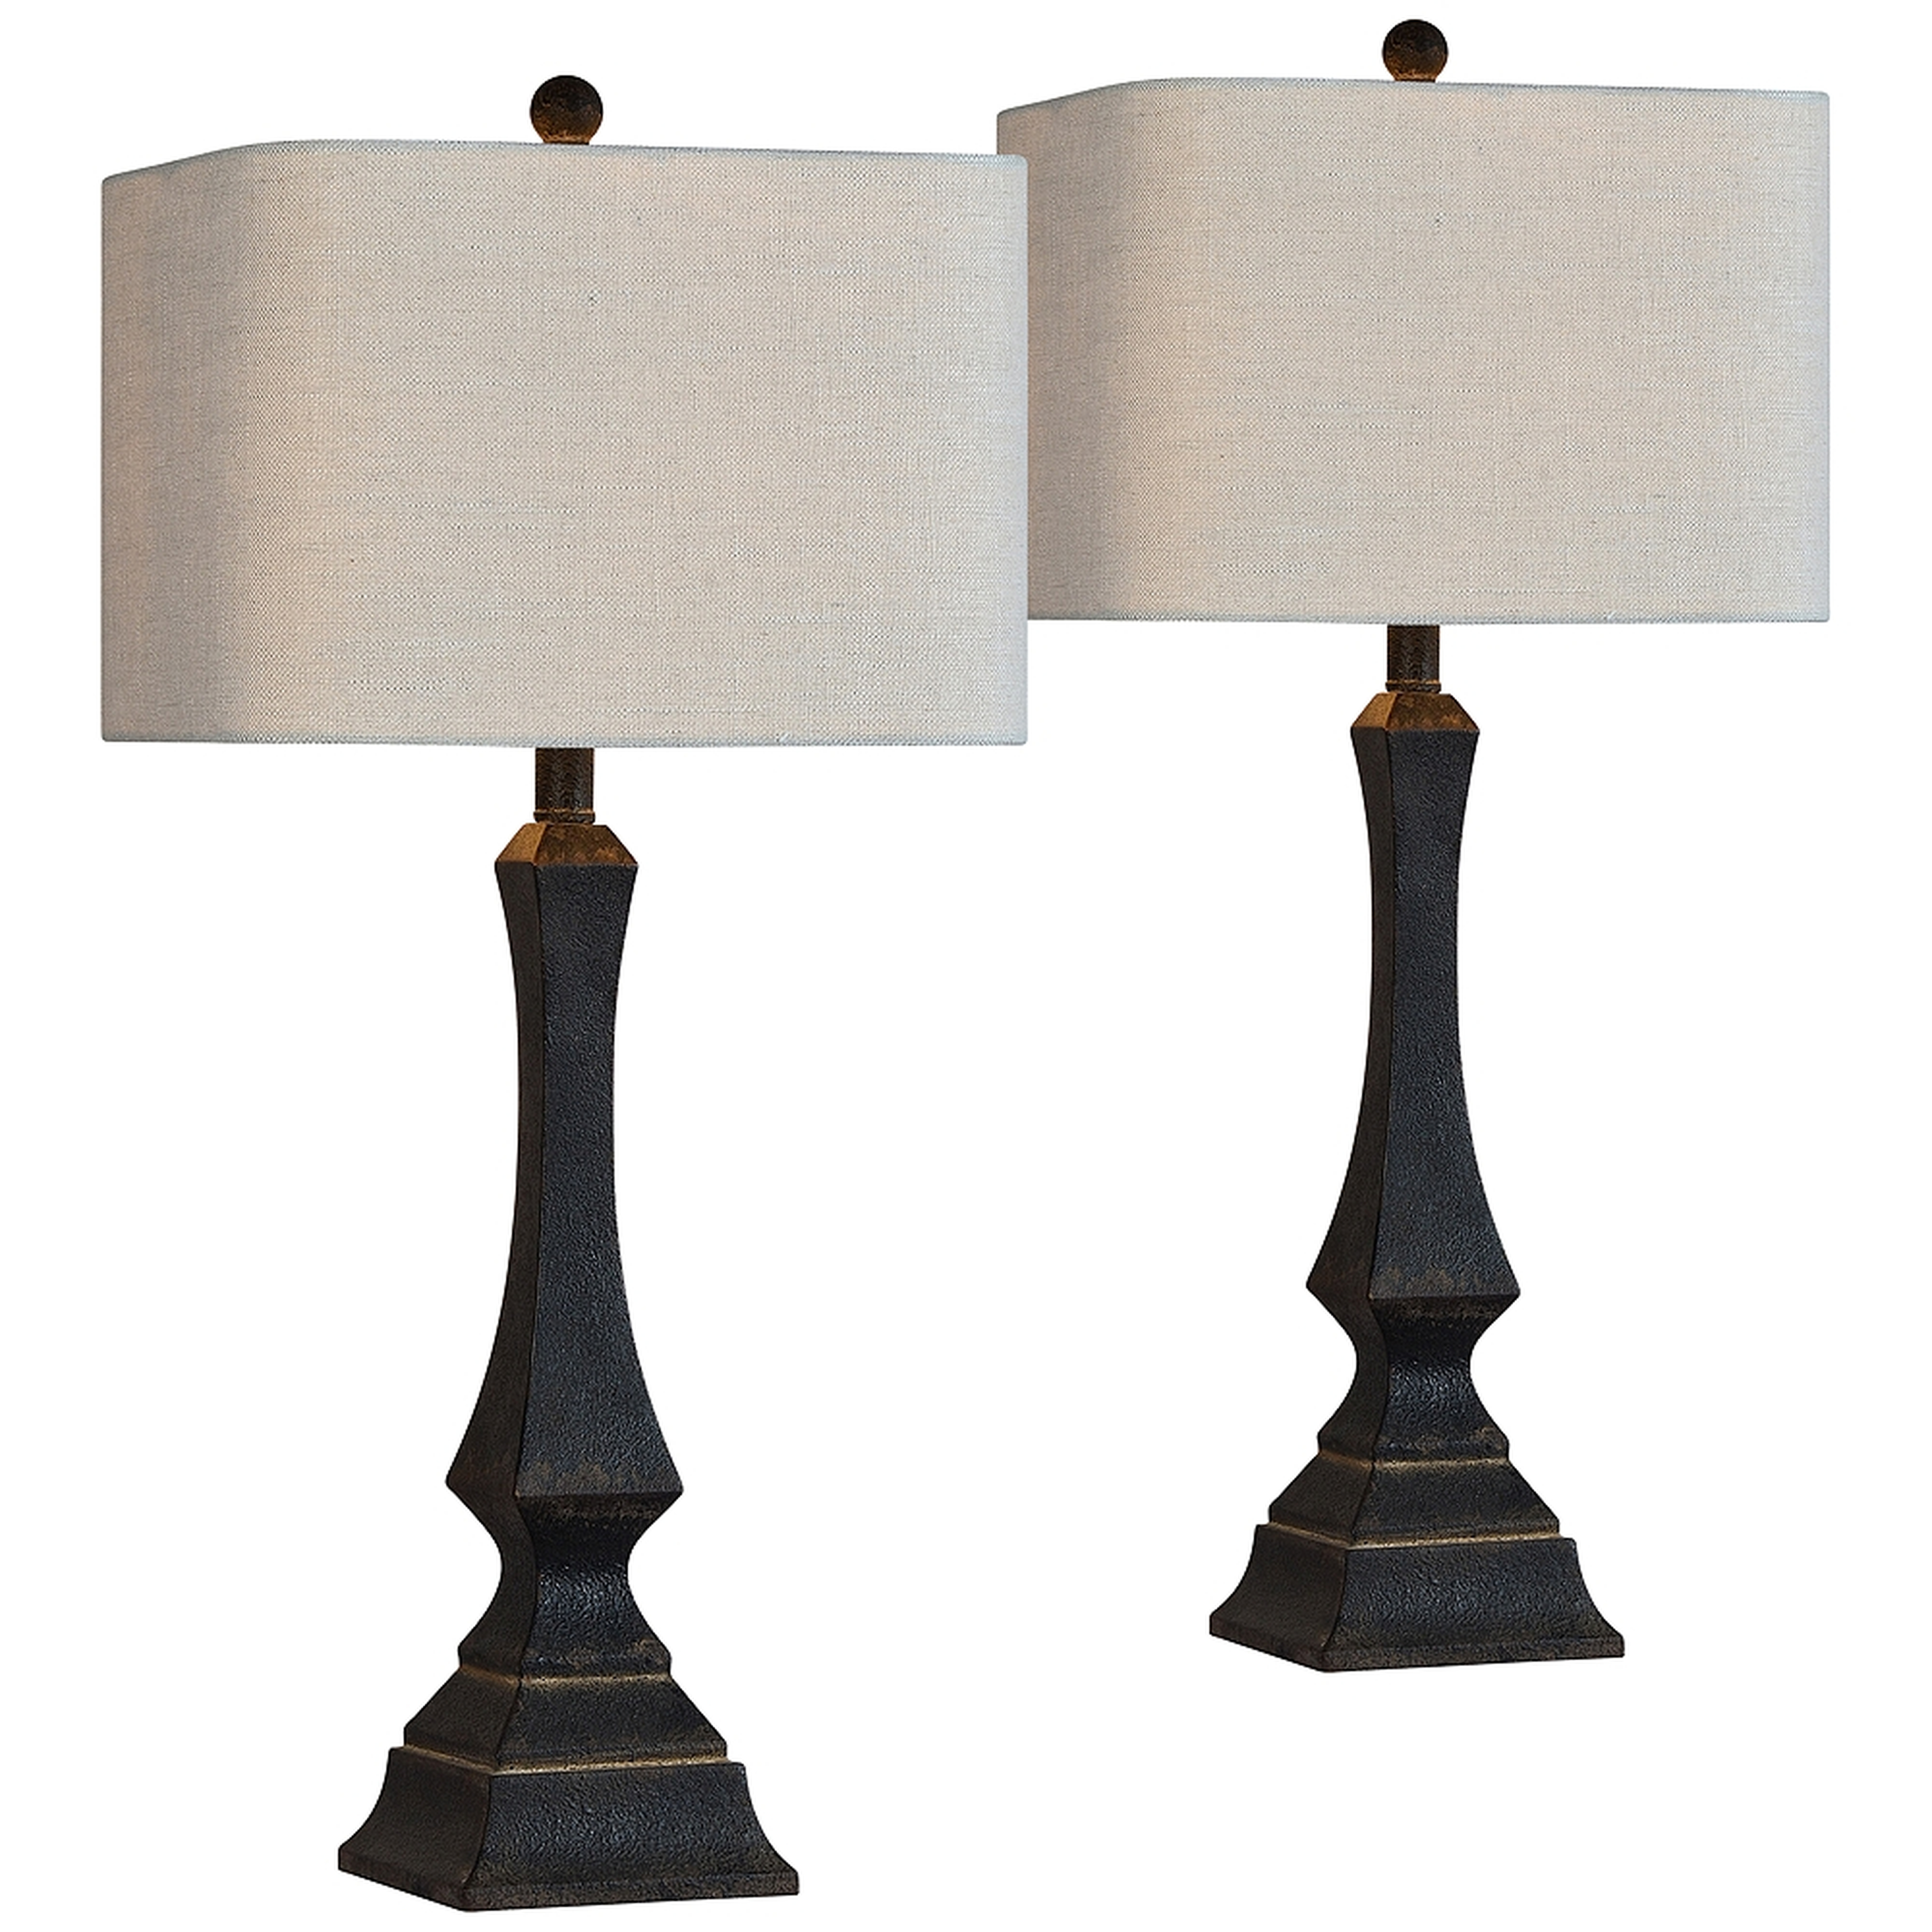 Vincent Slightly Distressed Black Table Lamps Set of 2 - Style # 578N0 - Lamps Plus